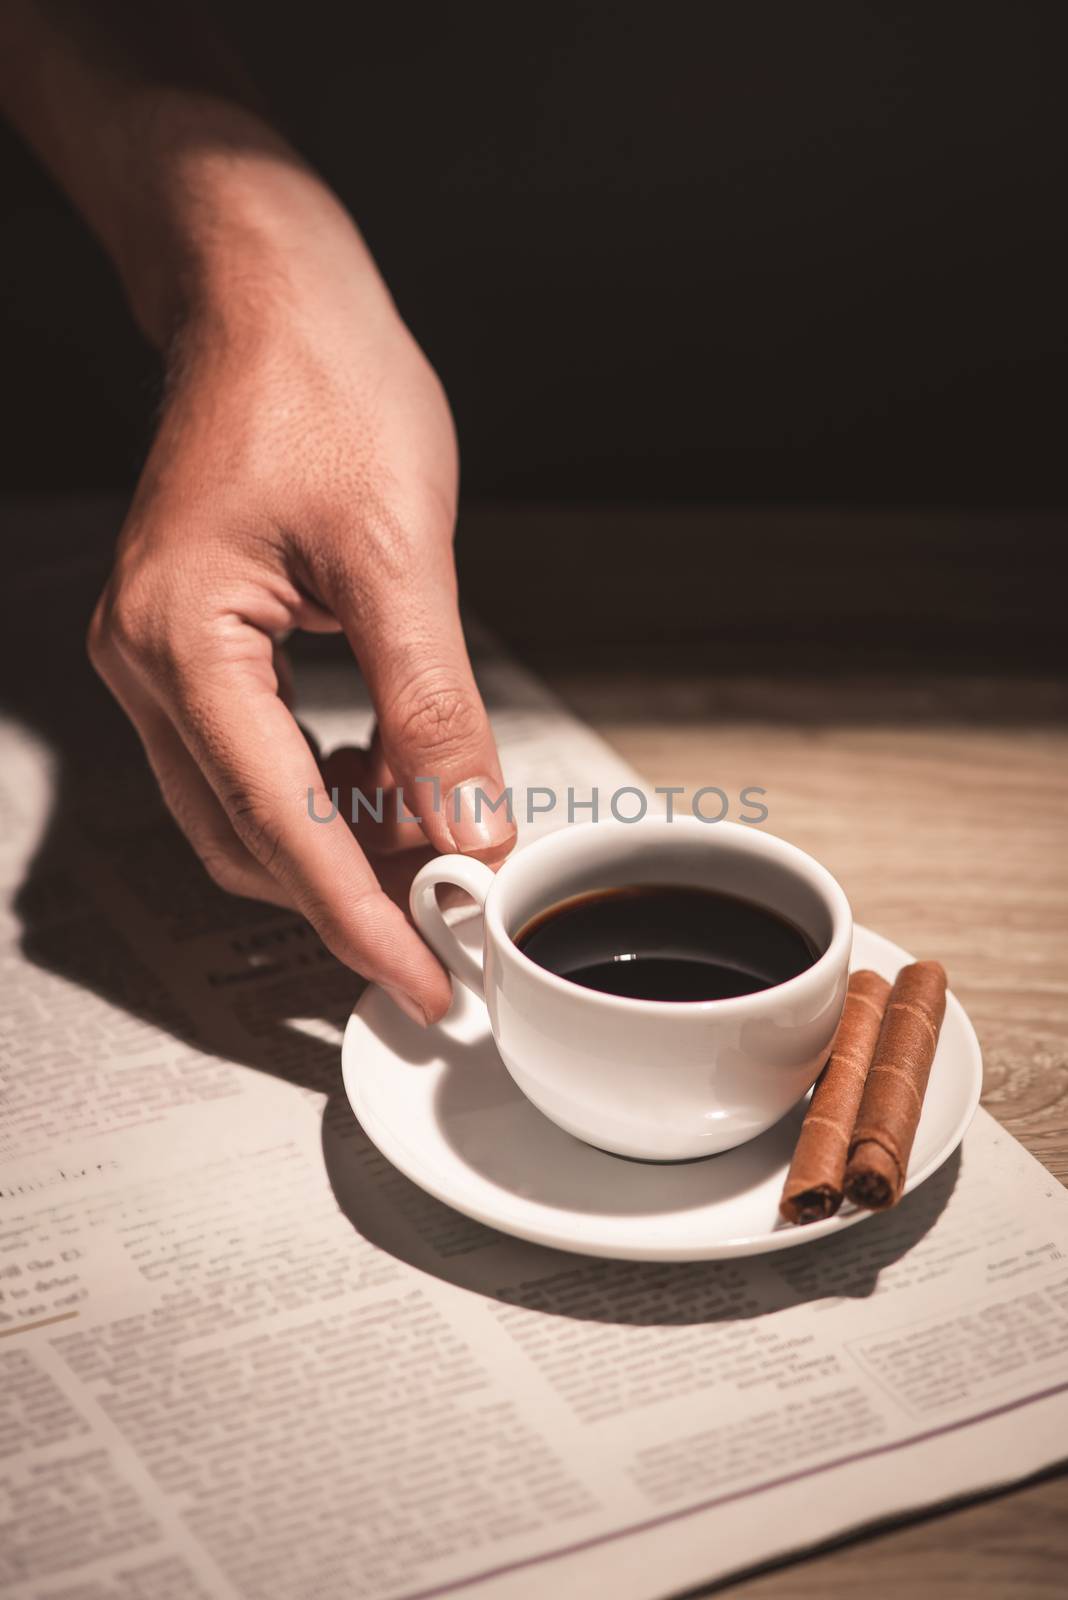 Male hands holding a cup of coffee over wooden table. by makidotvn